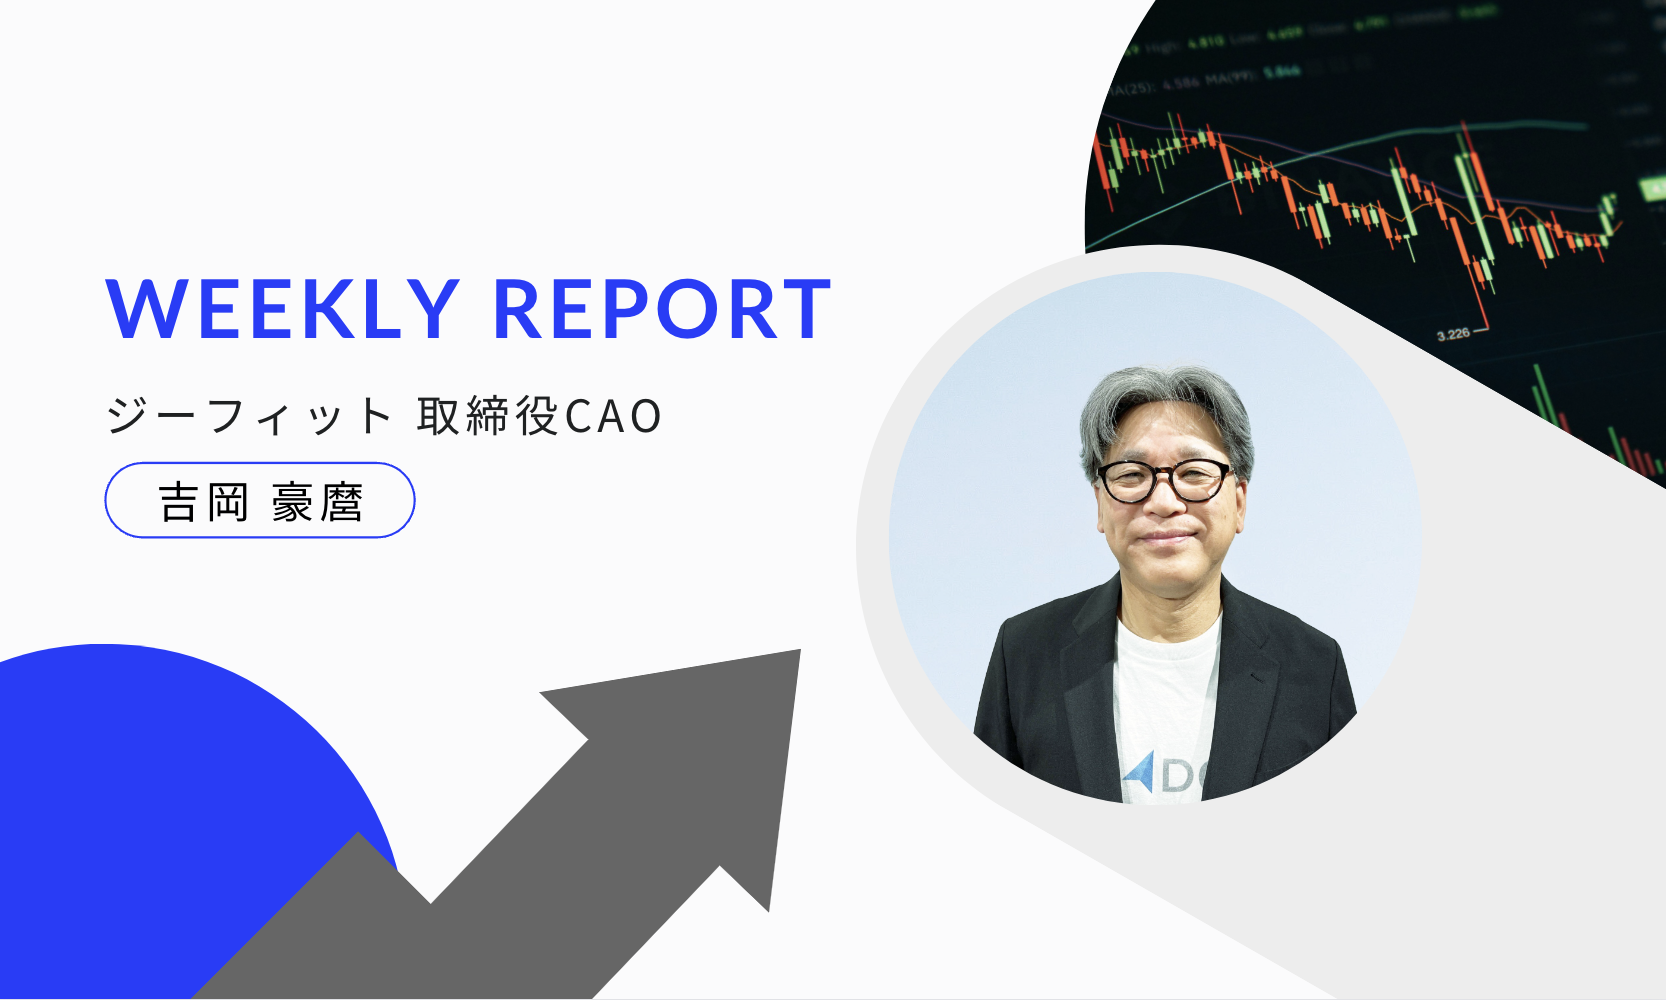 Weekly Report（4/15）：USD円高値更新は示現も、「上昇の過熱」に対する短期的な調整に要注意